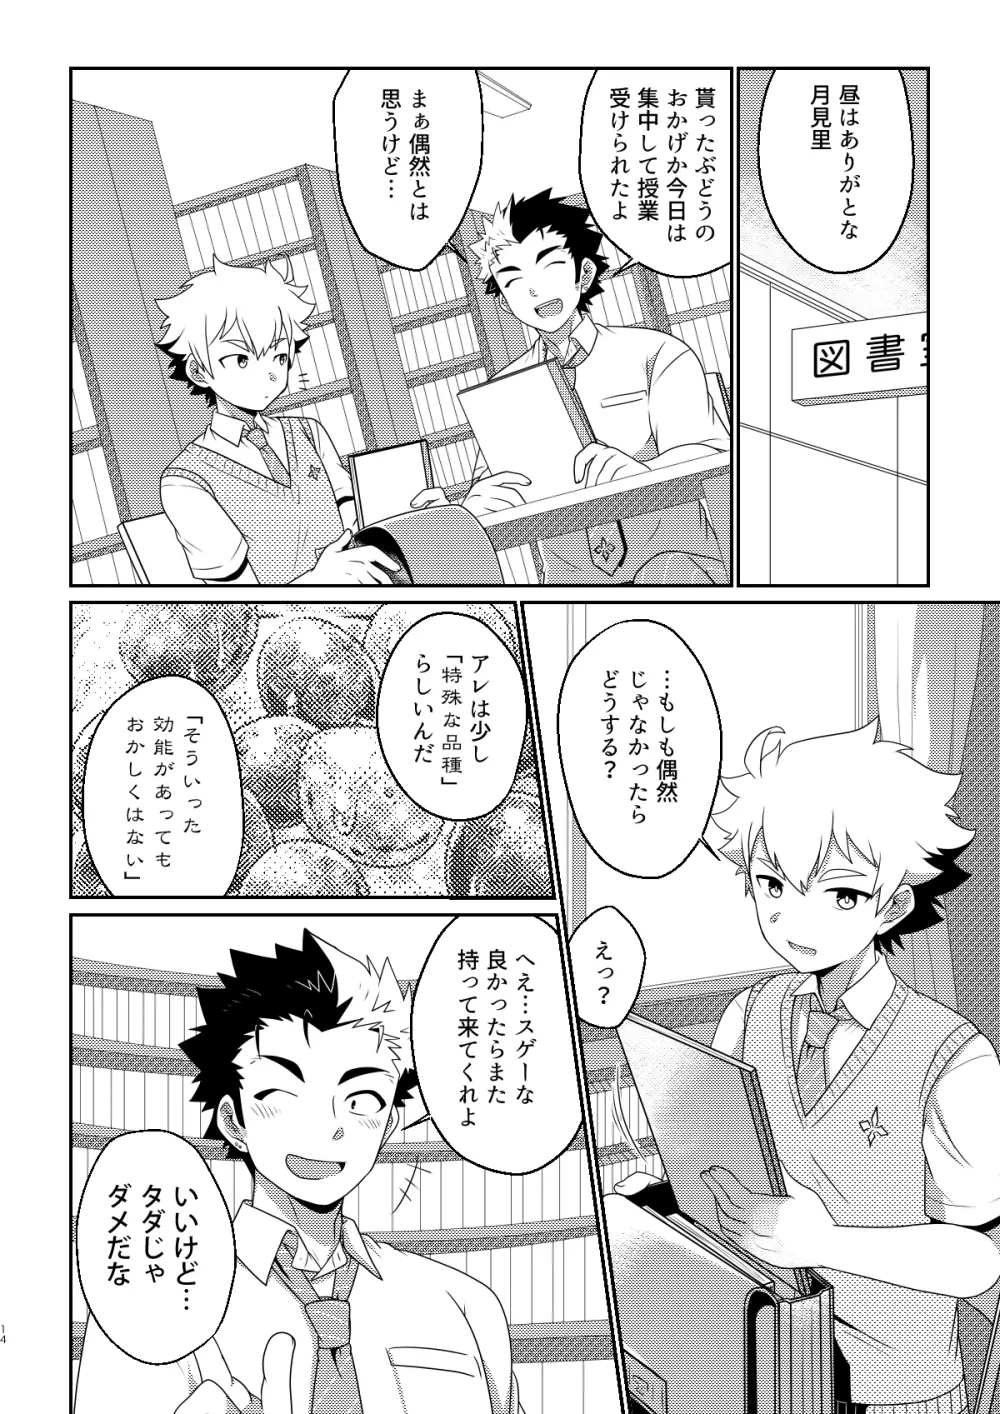 intoxication Page.13